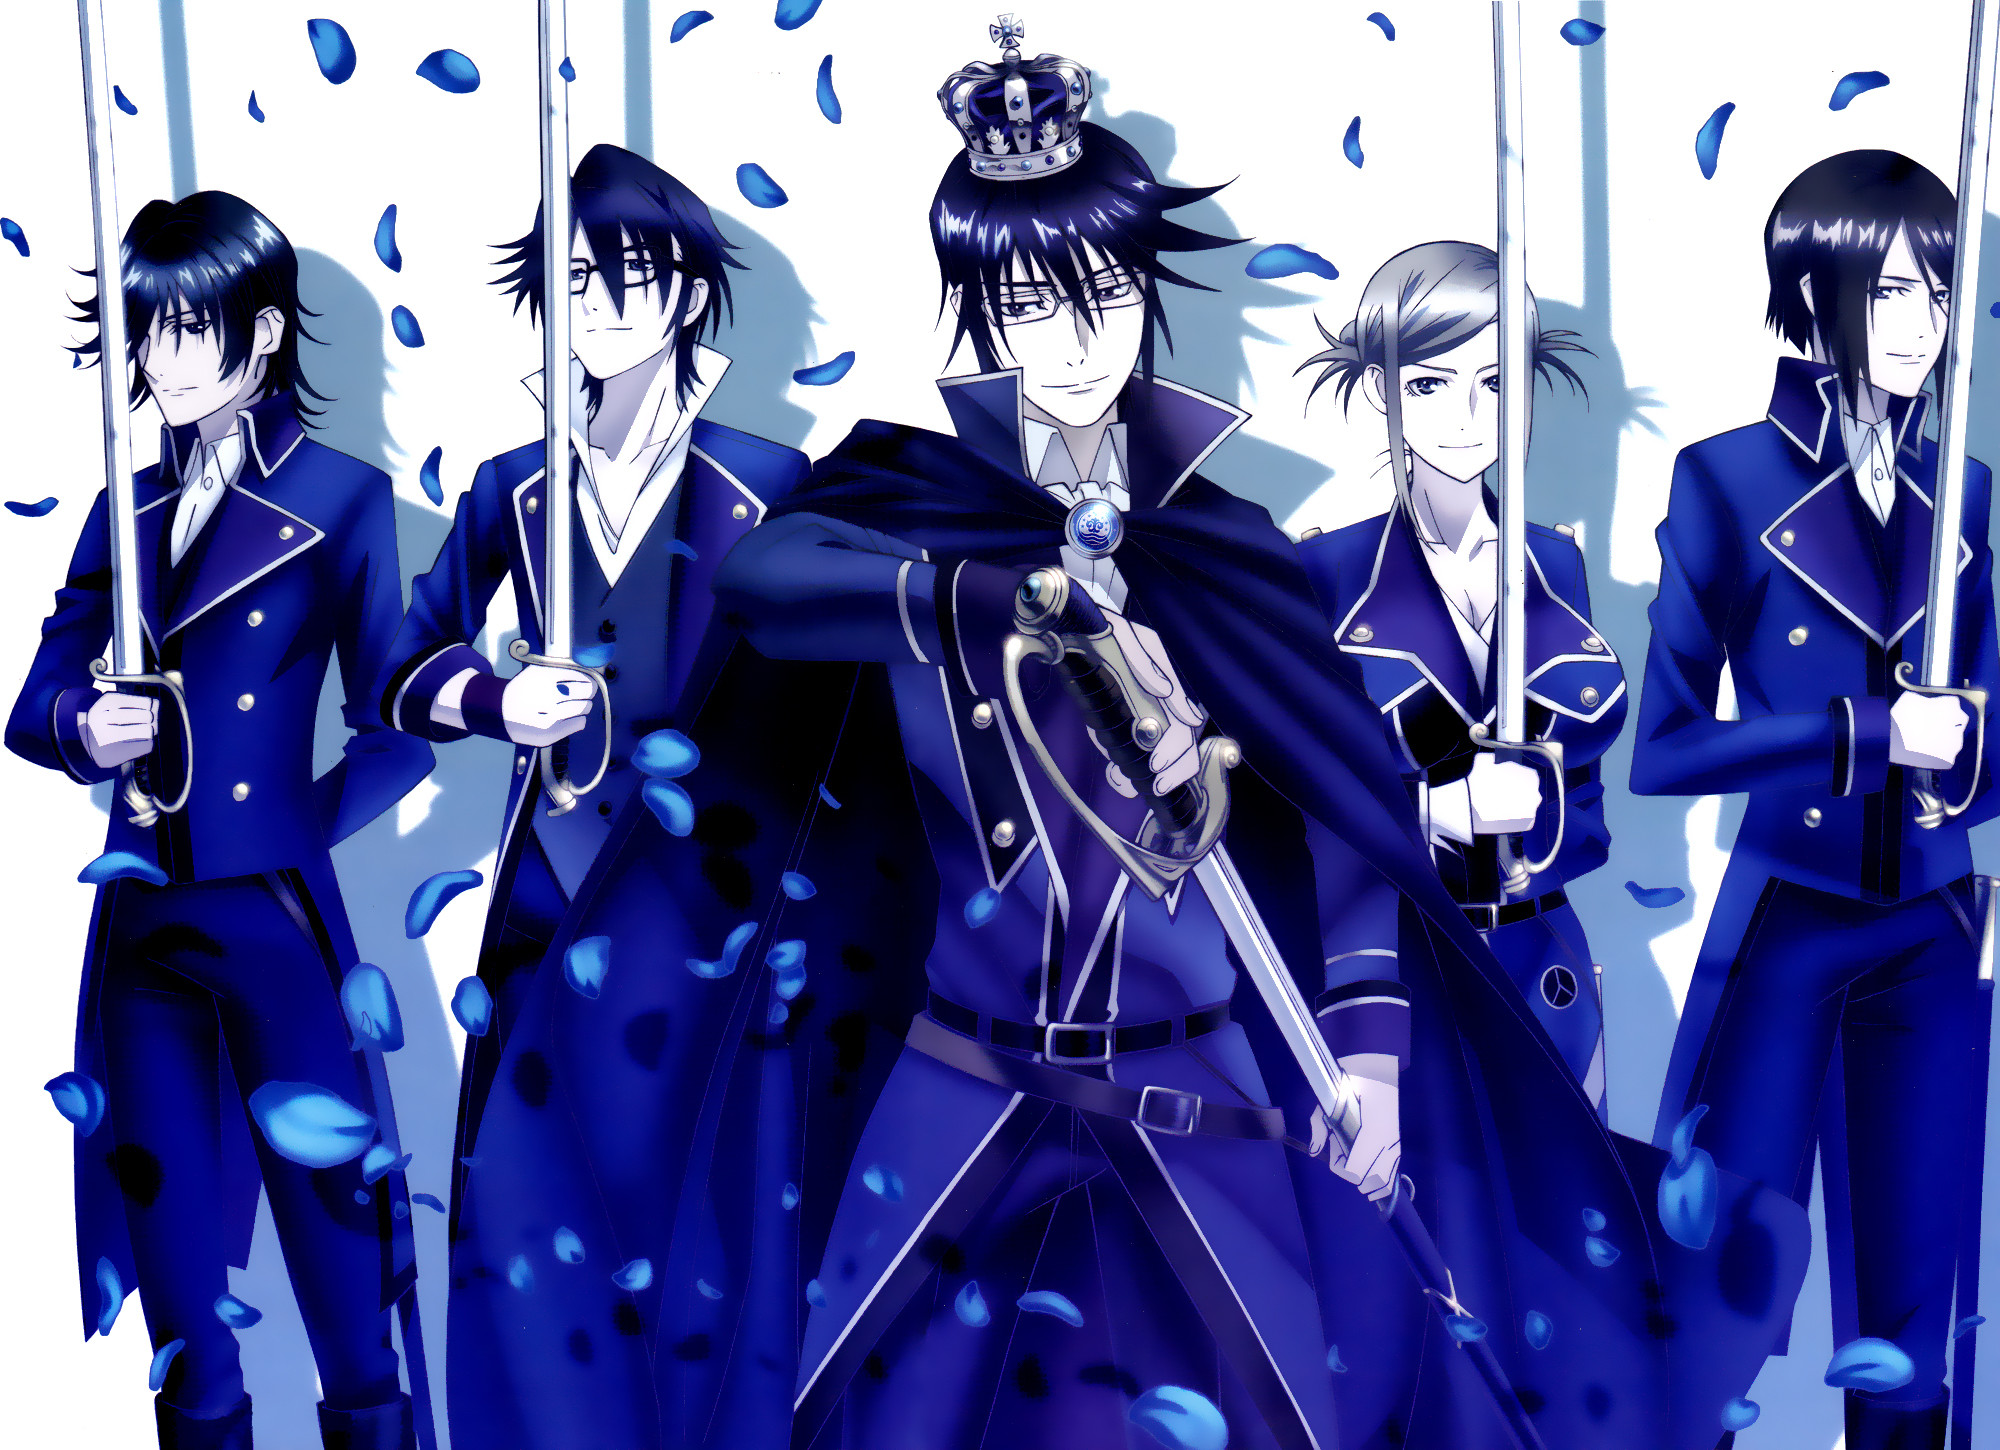 2000x1450 The Anime Kingdom images **K-Project** HD wallpaper and background photos